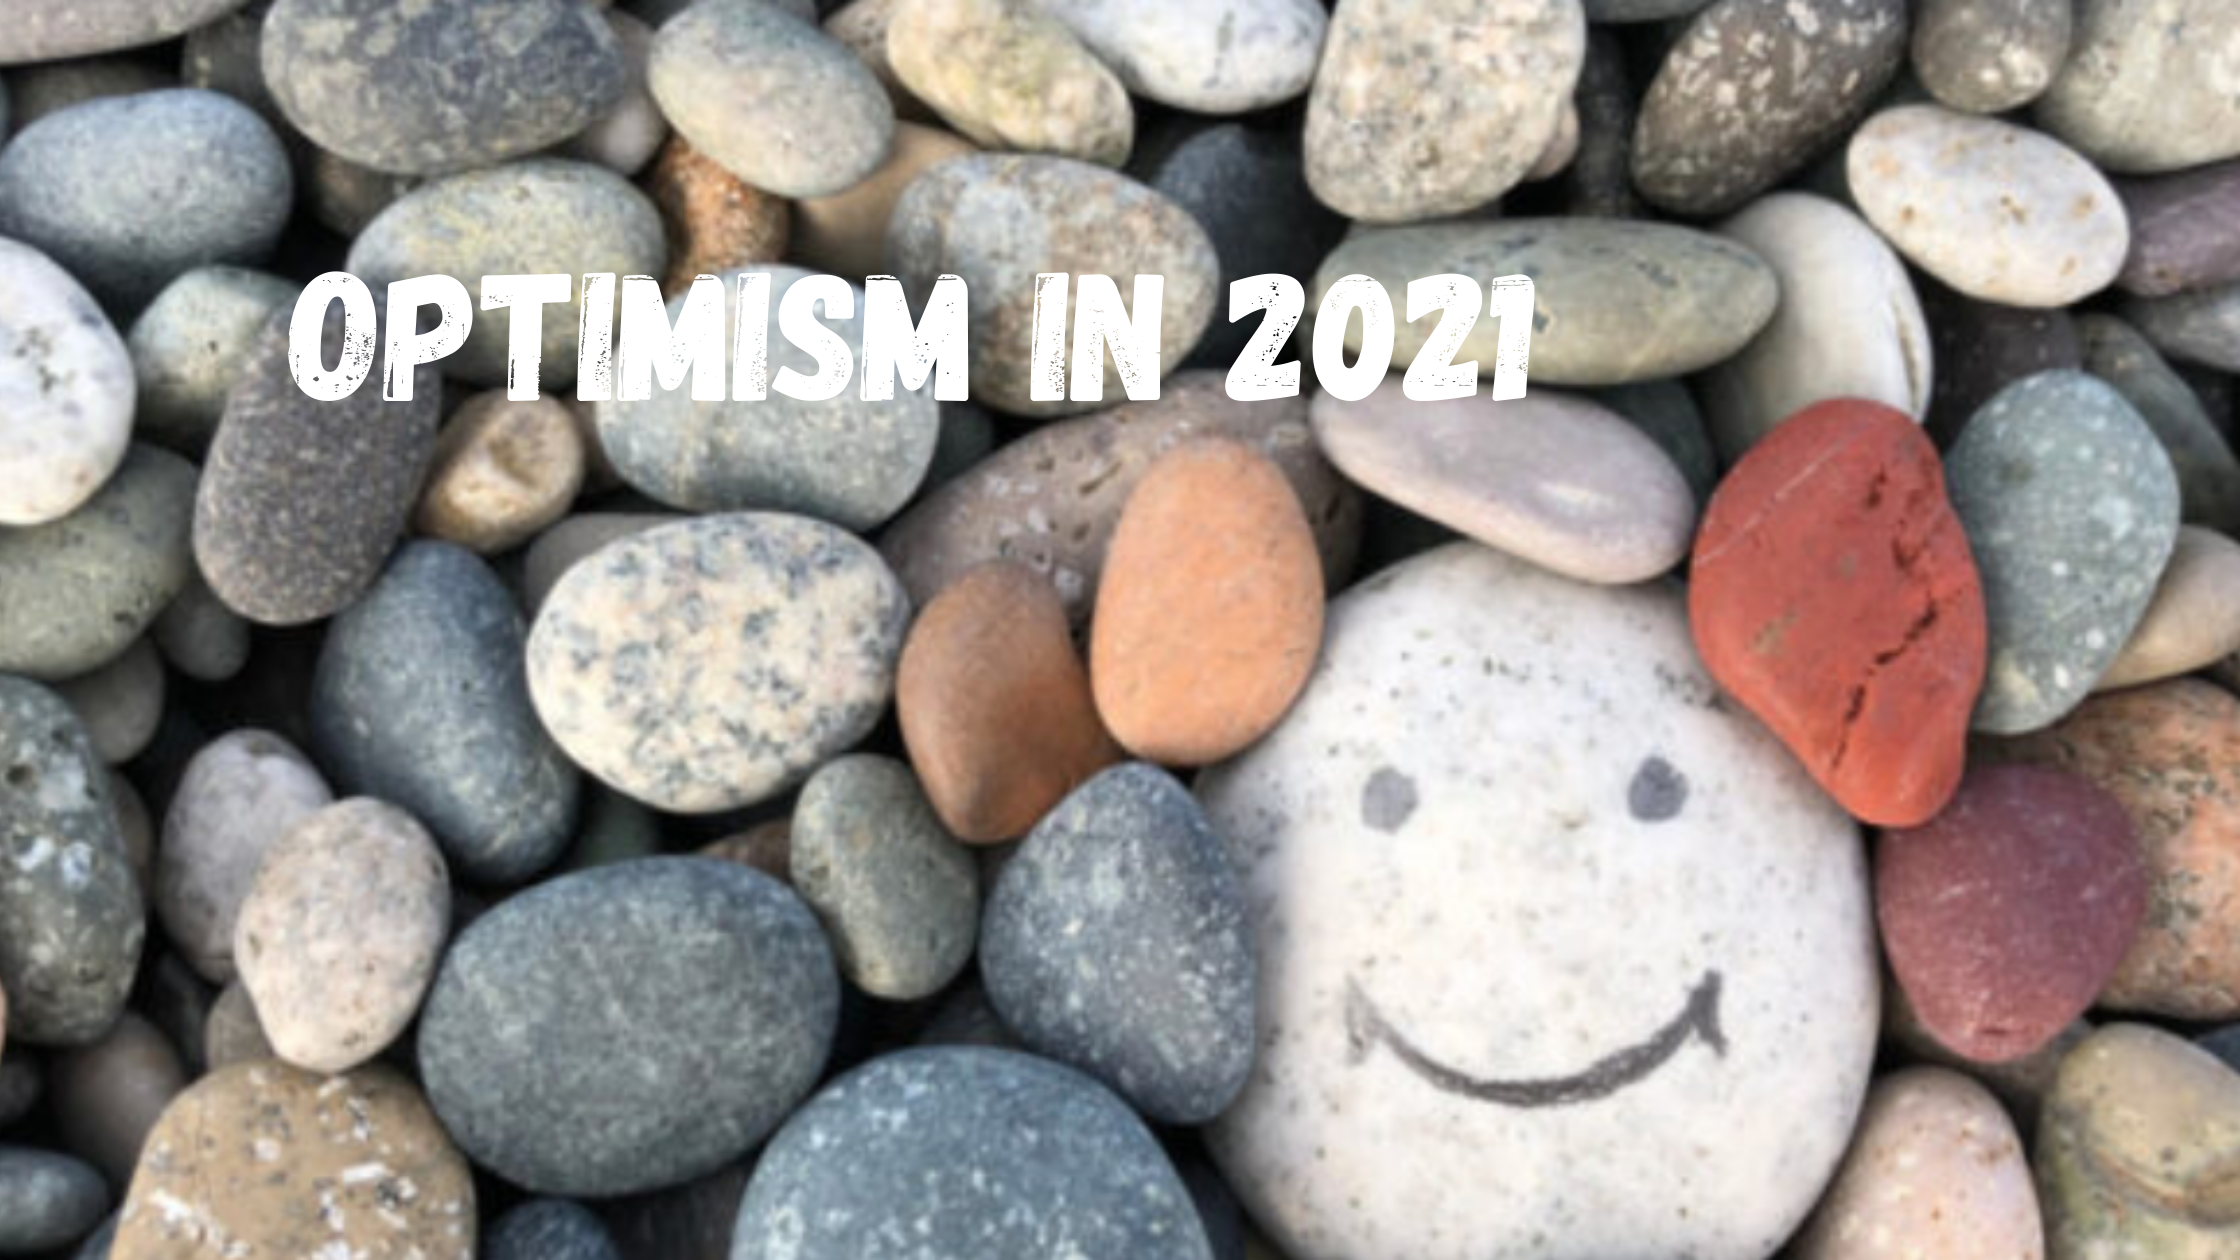 HR experts’ reasons for optimism going into 2021